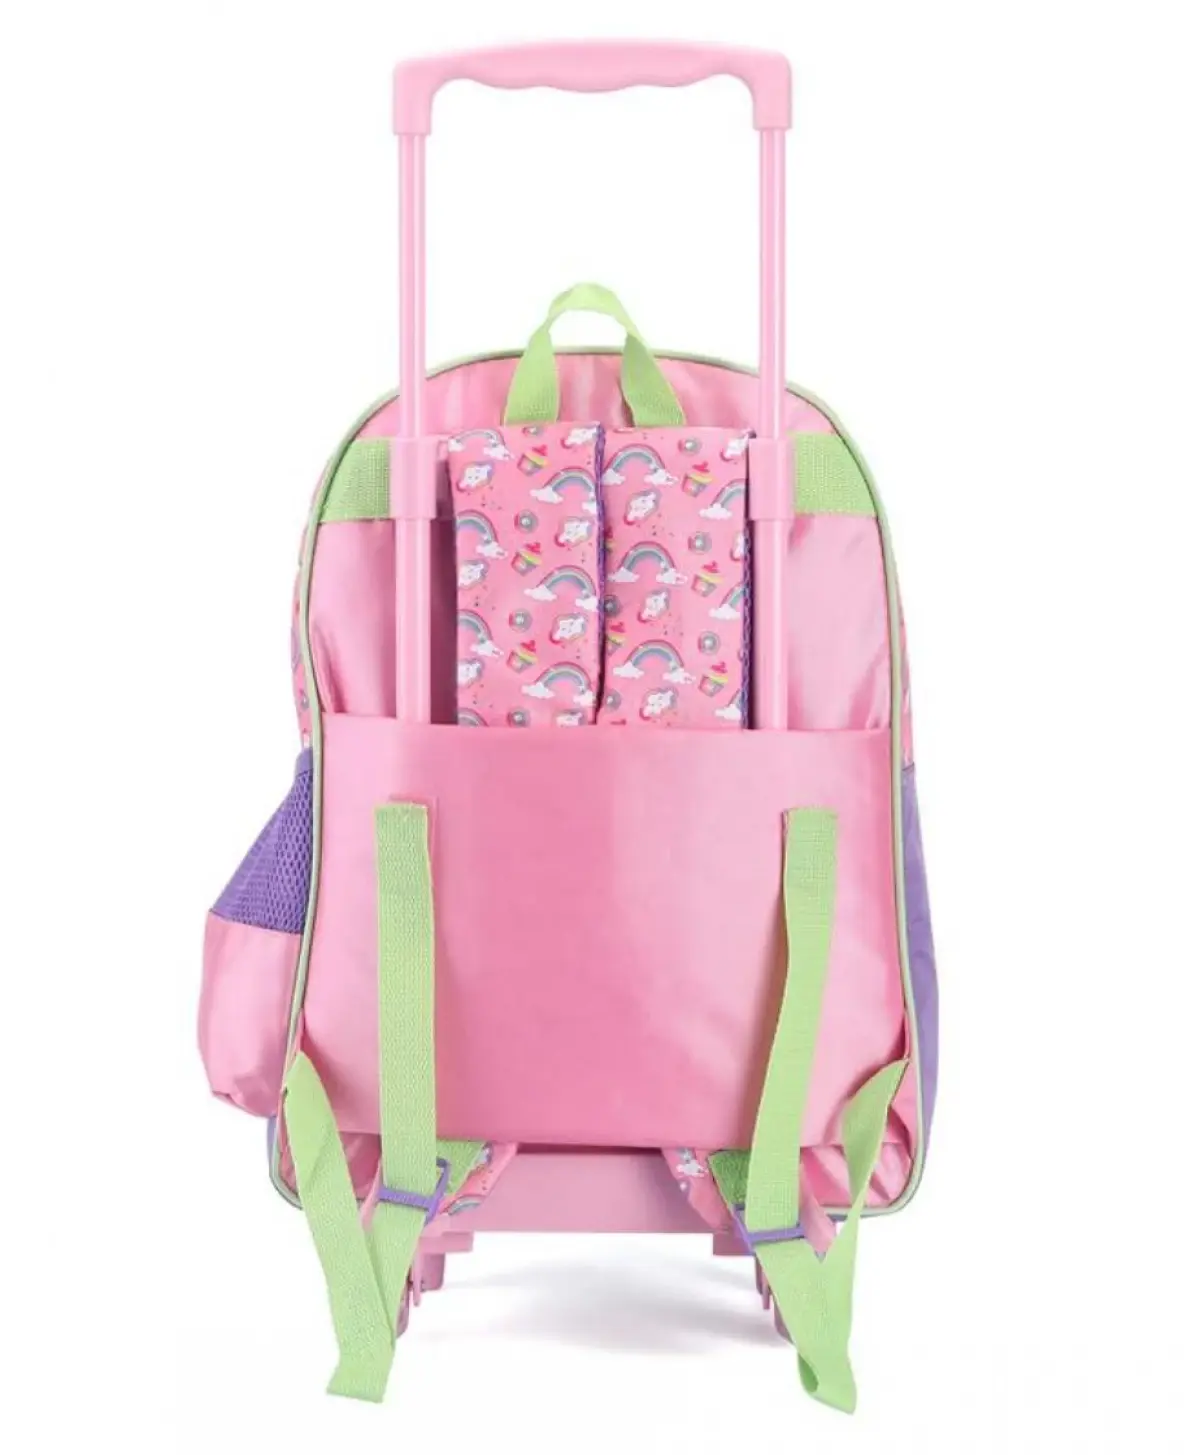 Striders 16 inches Barbie School Trolley Bag Dreams in Style for Little Fashionistas Multicolor For Kids Ages 6Y+